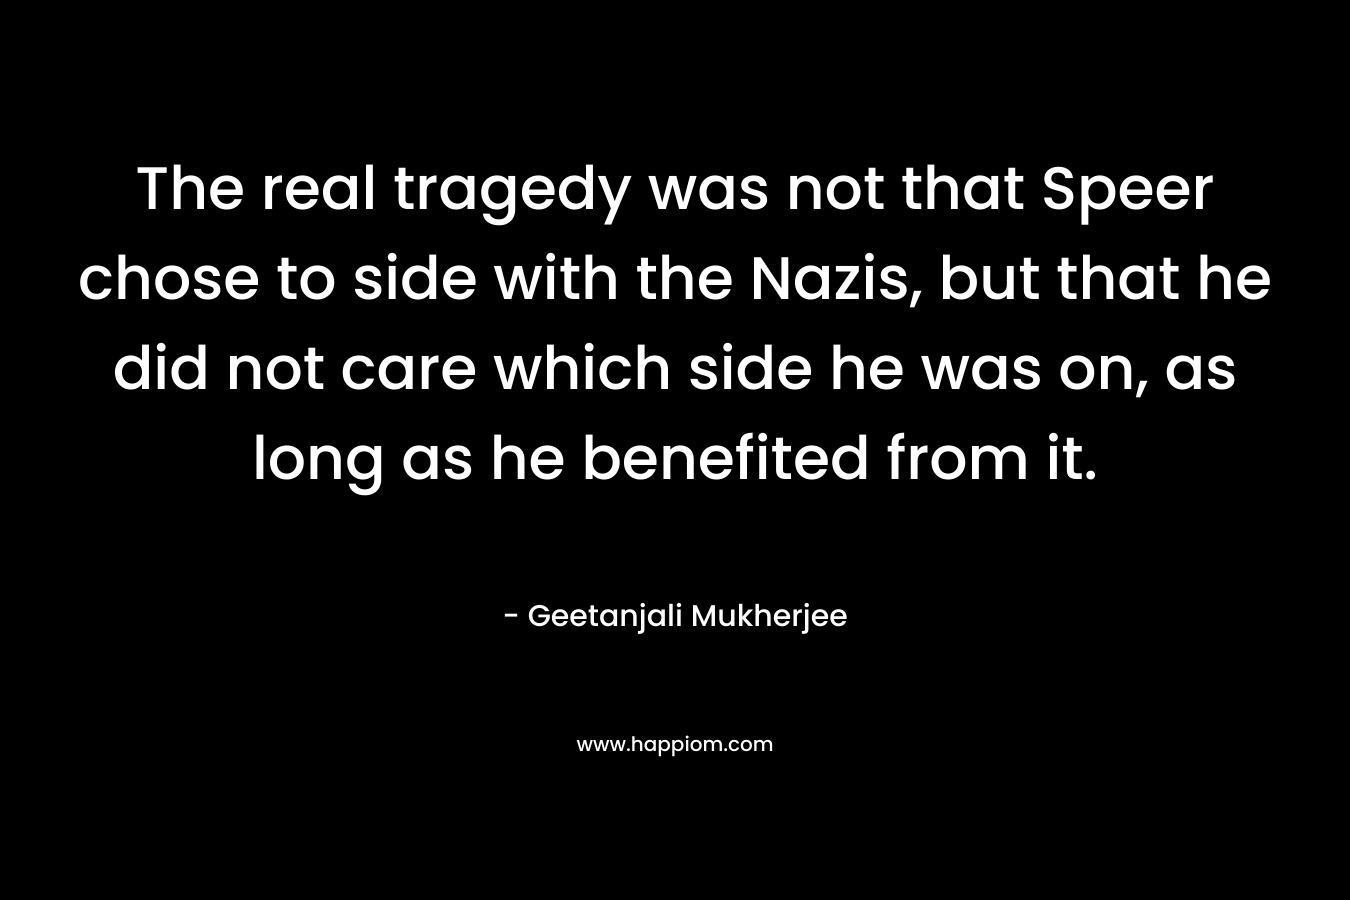 The real tragedy was not that Speer chose to side with the Nazis, but that he did not care which side he was on, as long as he benefited from it.